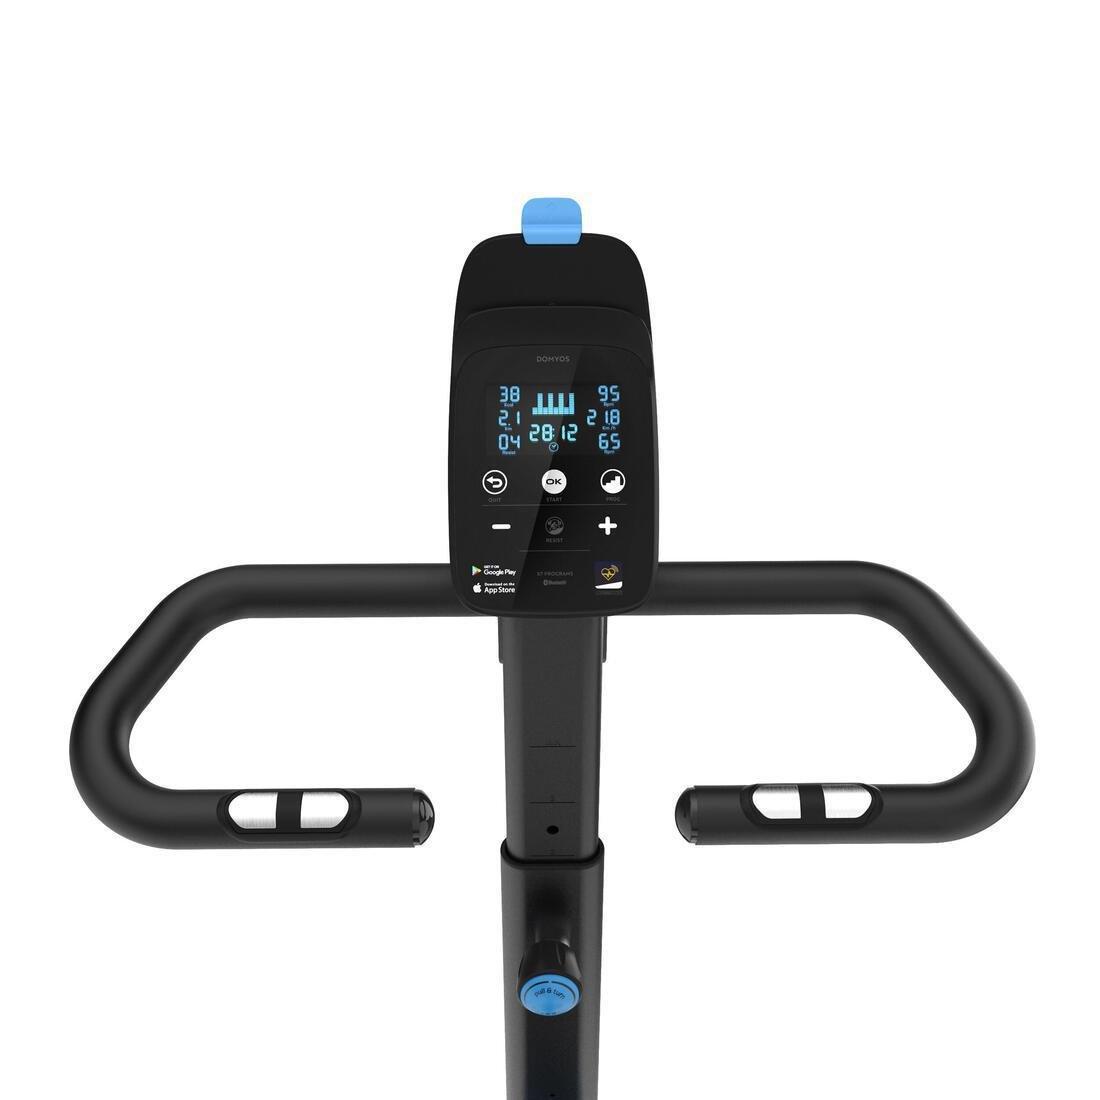 DOMYOS - Self-Powered Exercise Bike 520 Connected To Coaching Apps